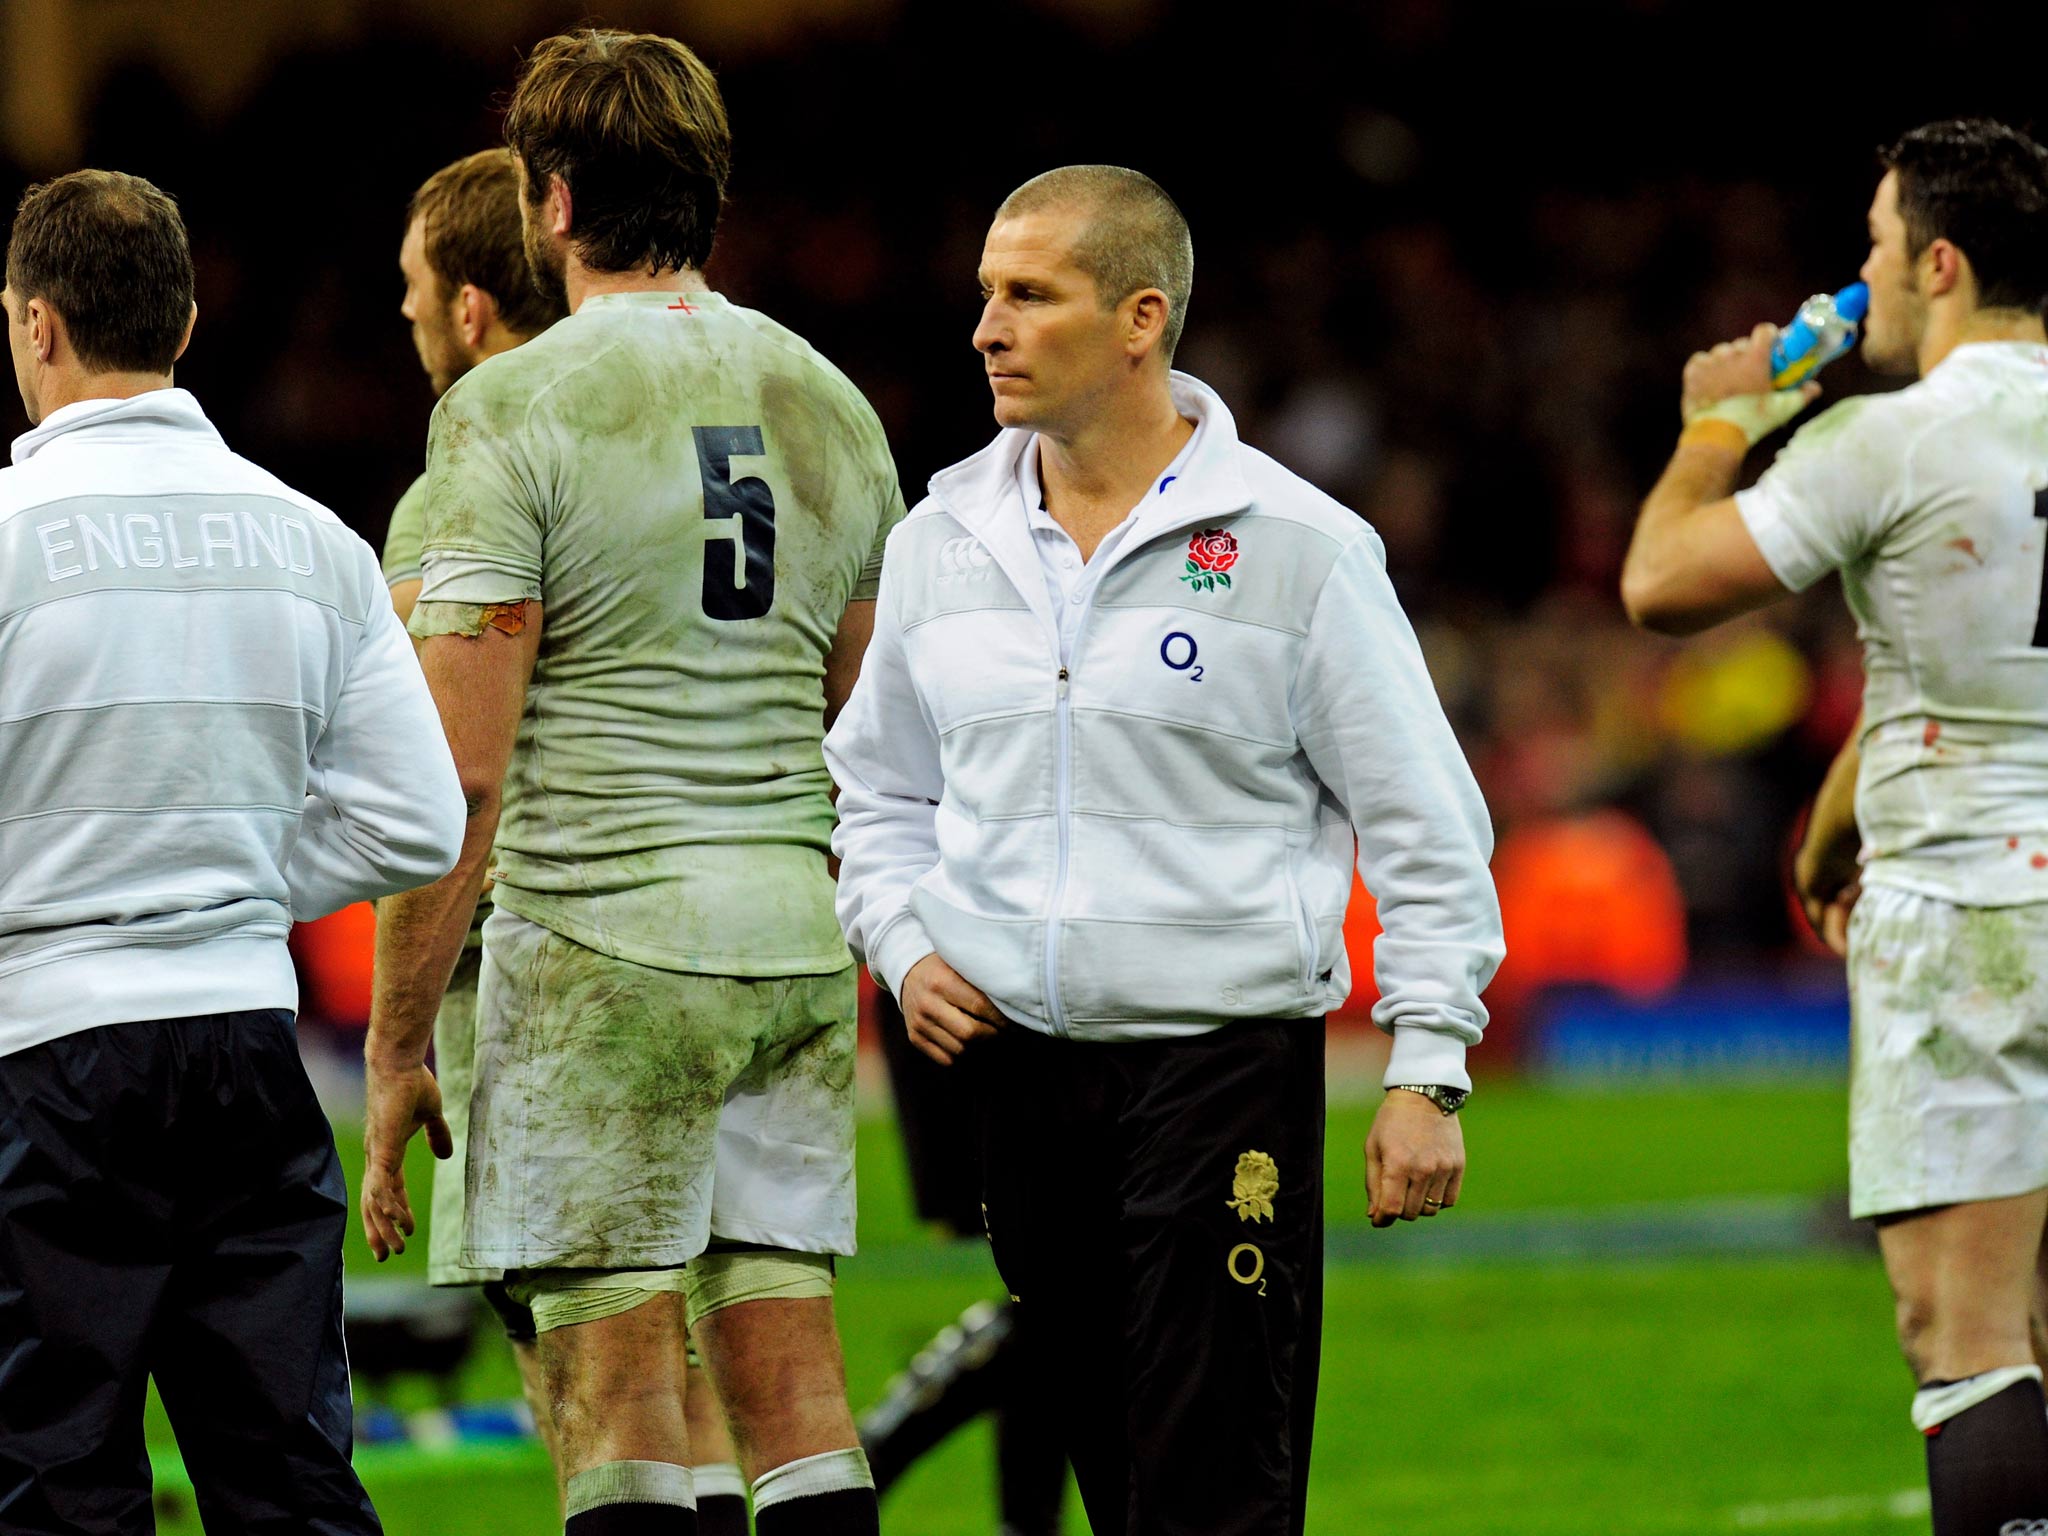 Dejected England head coach Stuart Lancaster looks on following his team's defeat to Wales